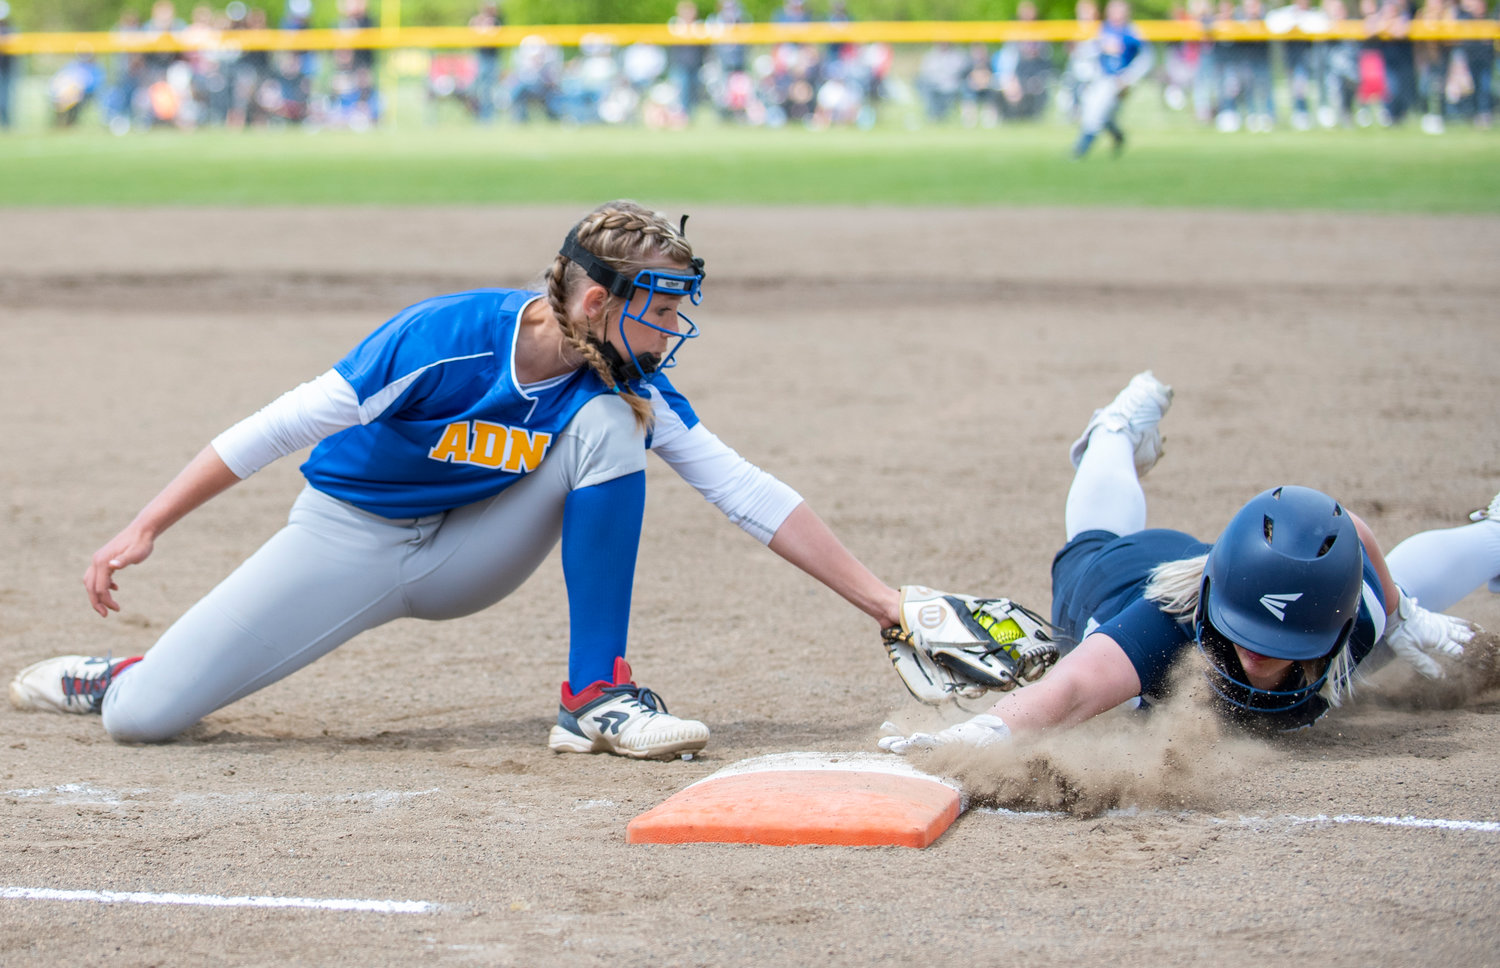 Adna first baseman Ava Simms goes for the tag on a pickoff attempt Saturday.